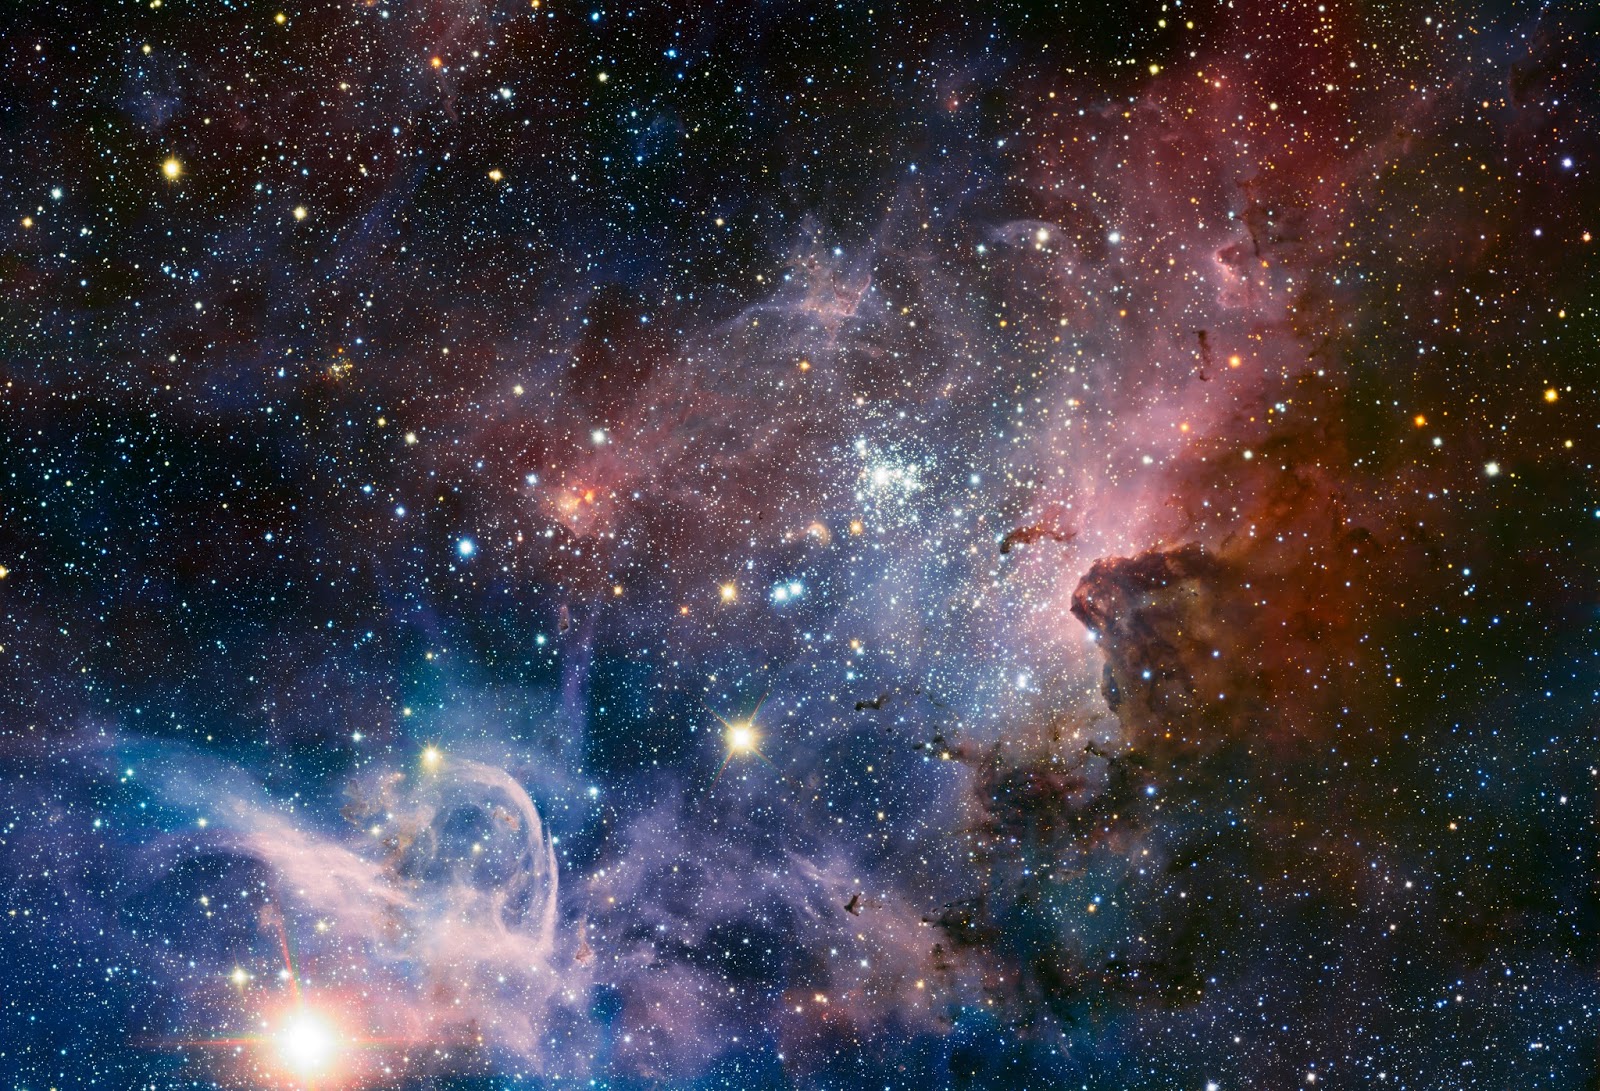 This broad image of the Carina Nebula, a region of massive star formation in the southern skies, was taken in infrared light using the HAWK-I camera on ESO’s Very Large Telescope. Many previously hidden features, scattered across a spectacular celestial landscape of gas, dust and young stars, have emerged.  Image Credit:ESO/T. Preibisch Explanation from: http://www.eso.org/public/images/eso1208a/